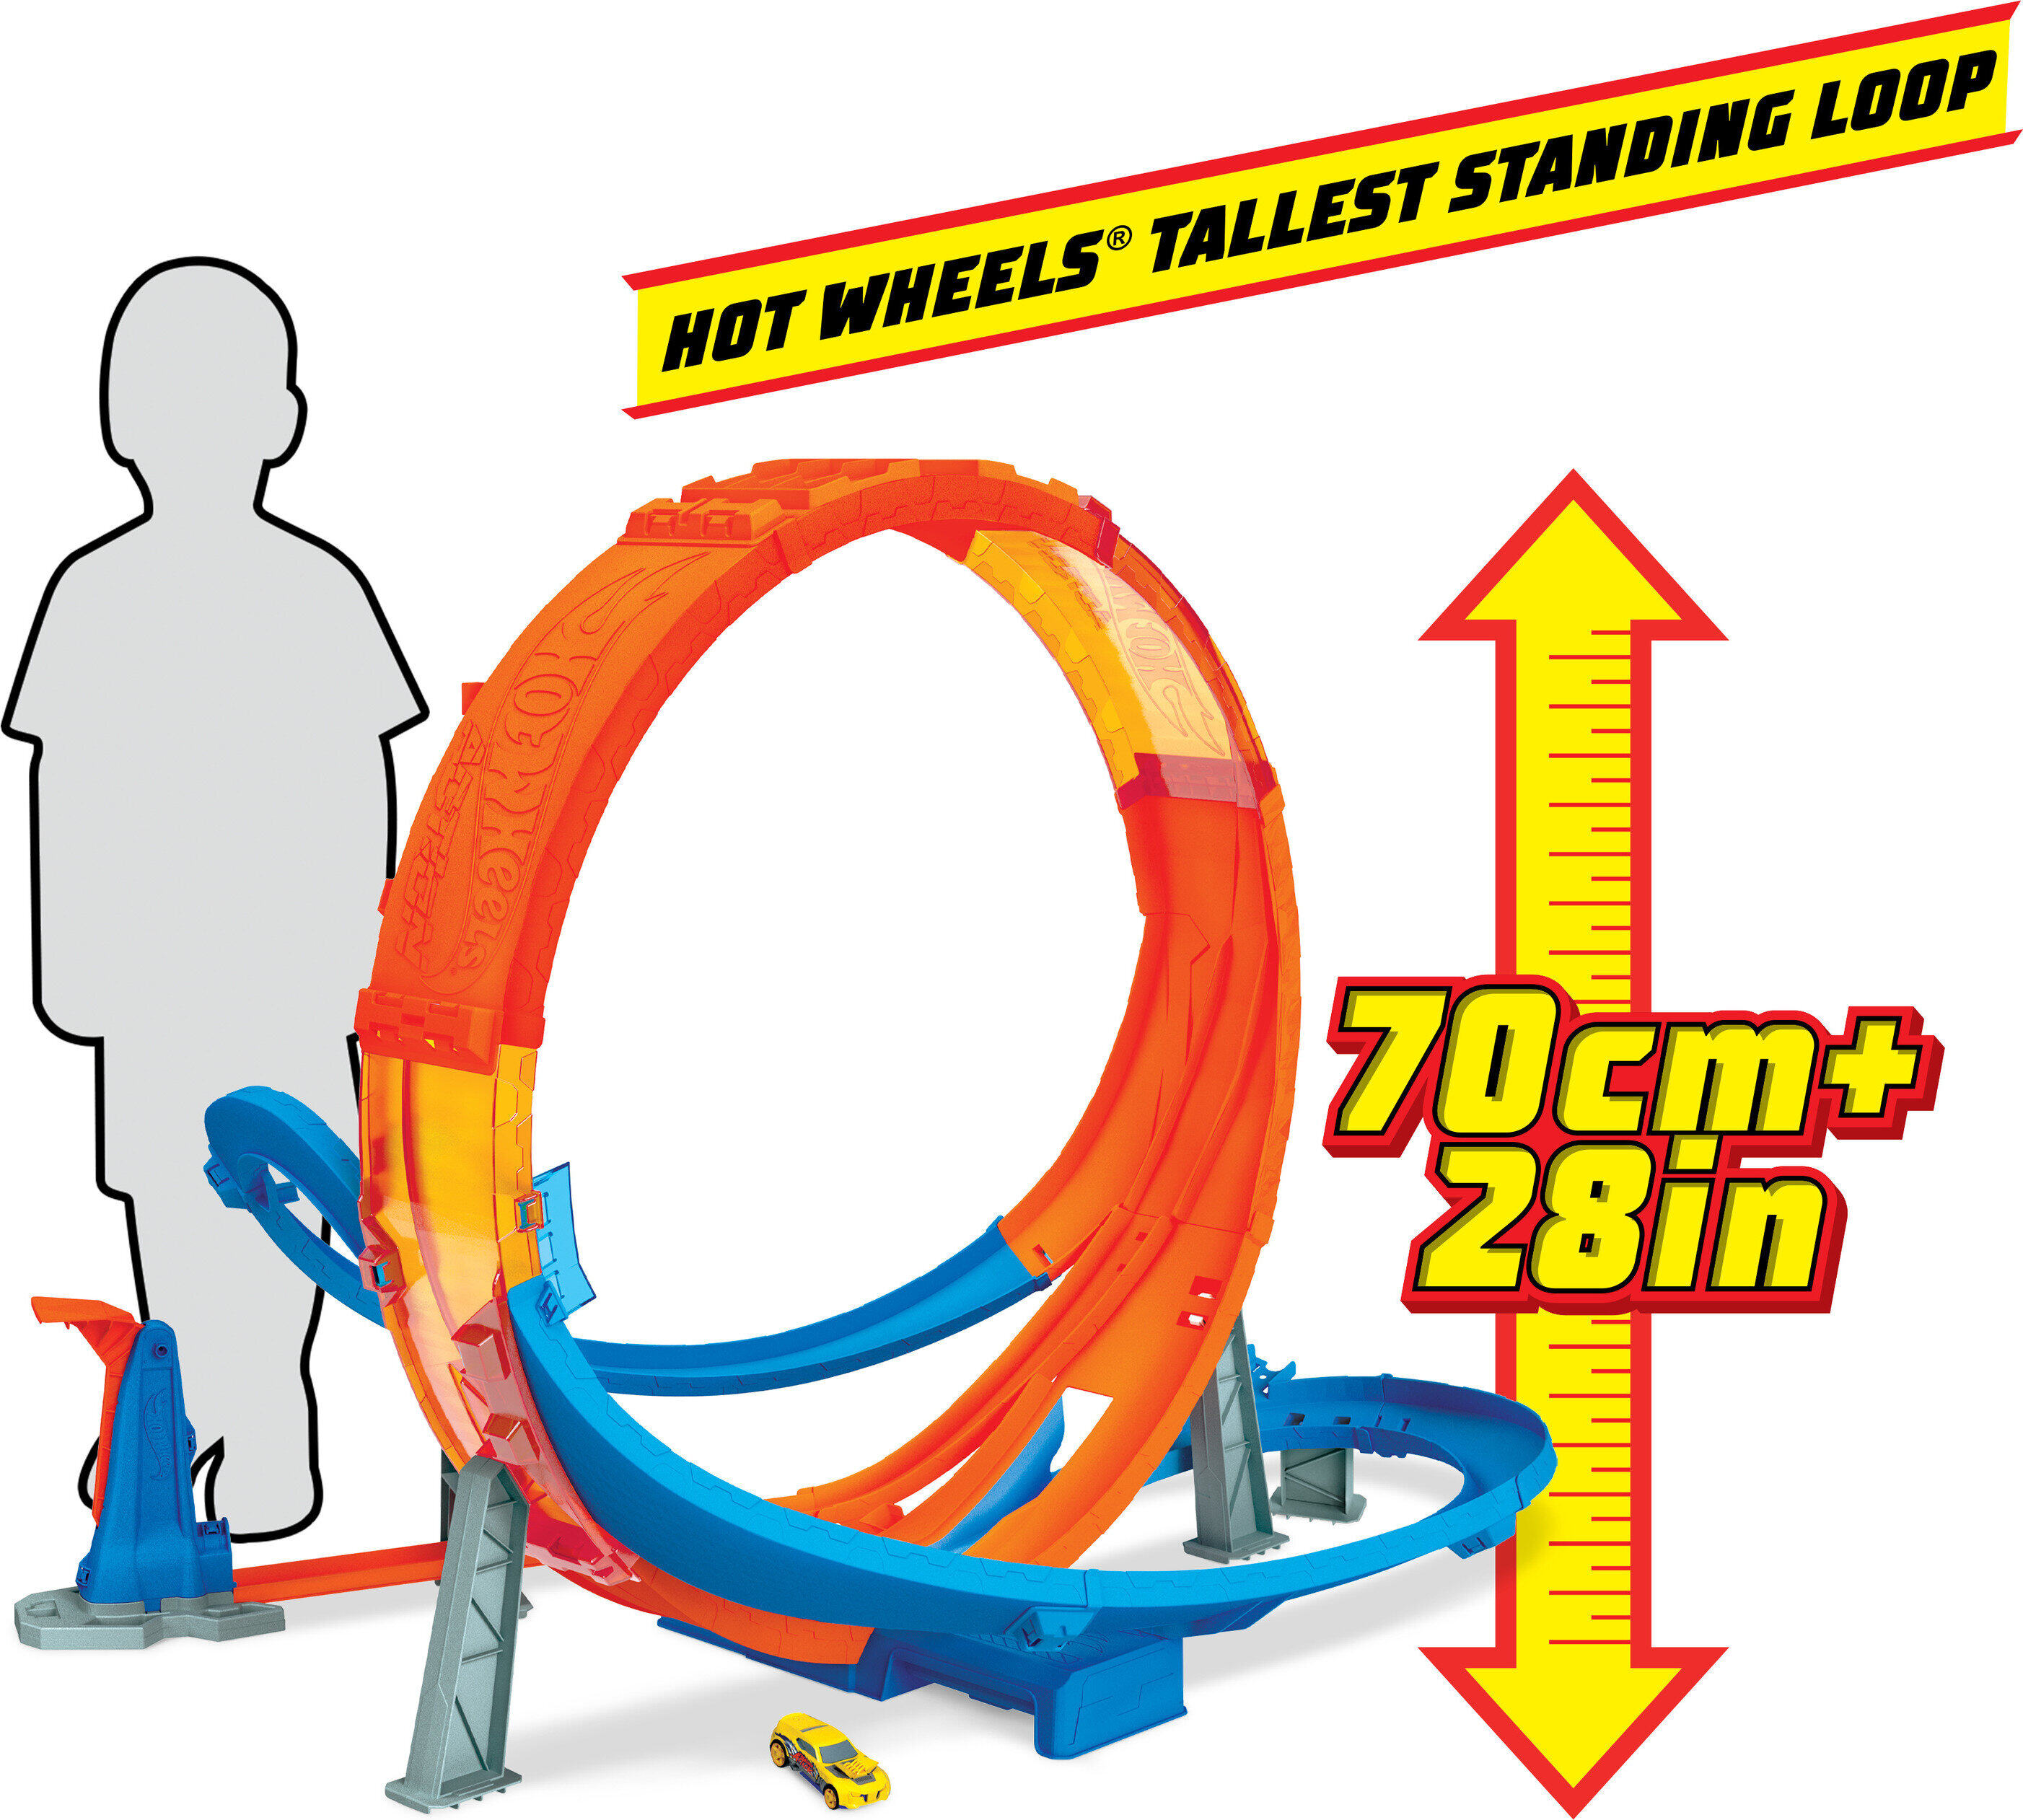 Hot Wheels Massive Loop Mayhem Track Set & 1:64 Scale Toy Car with Loop (28 Inches Wide) - image 6 of 7